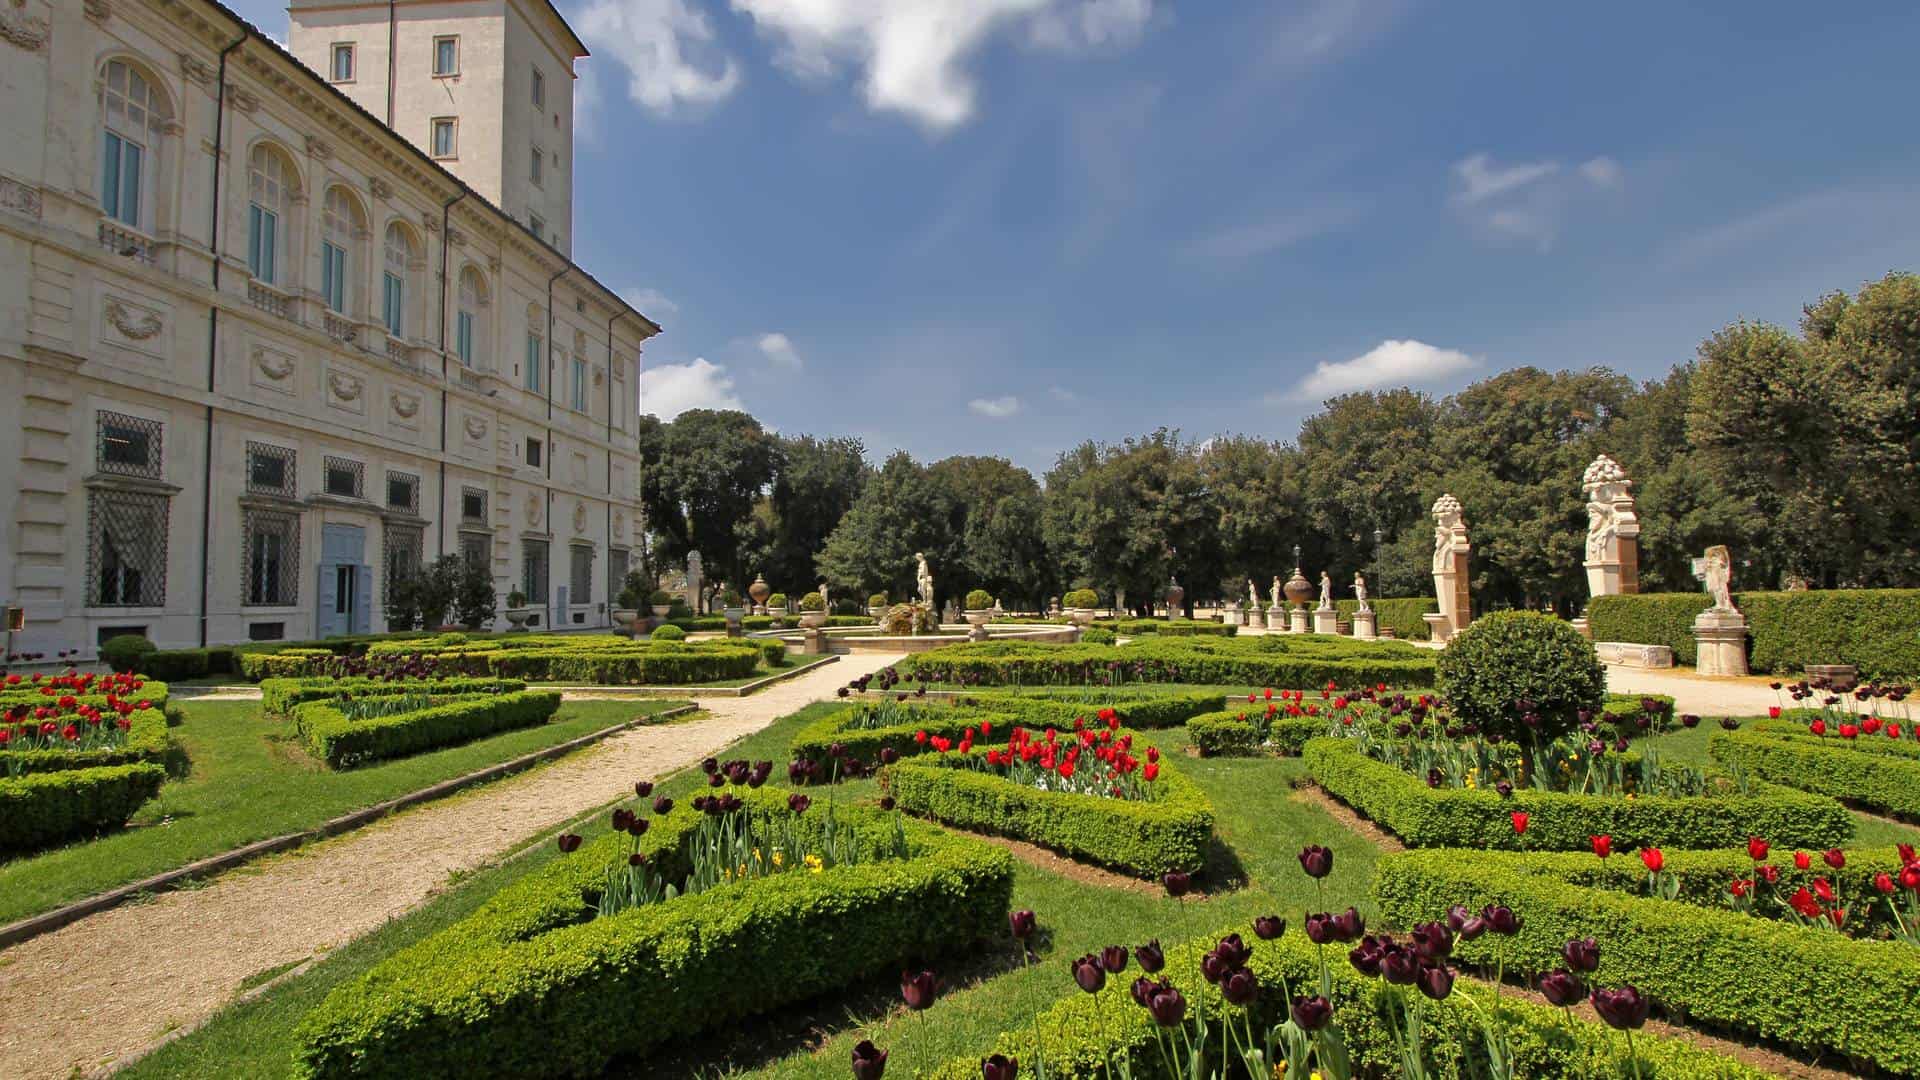 View of Villa Borghese and its garden